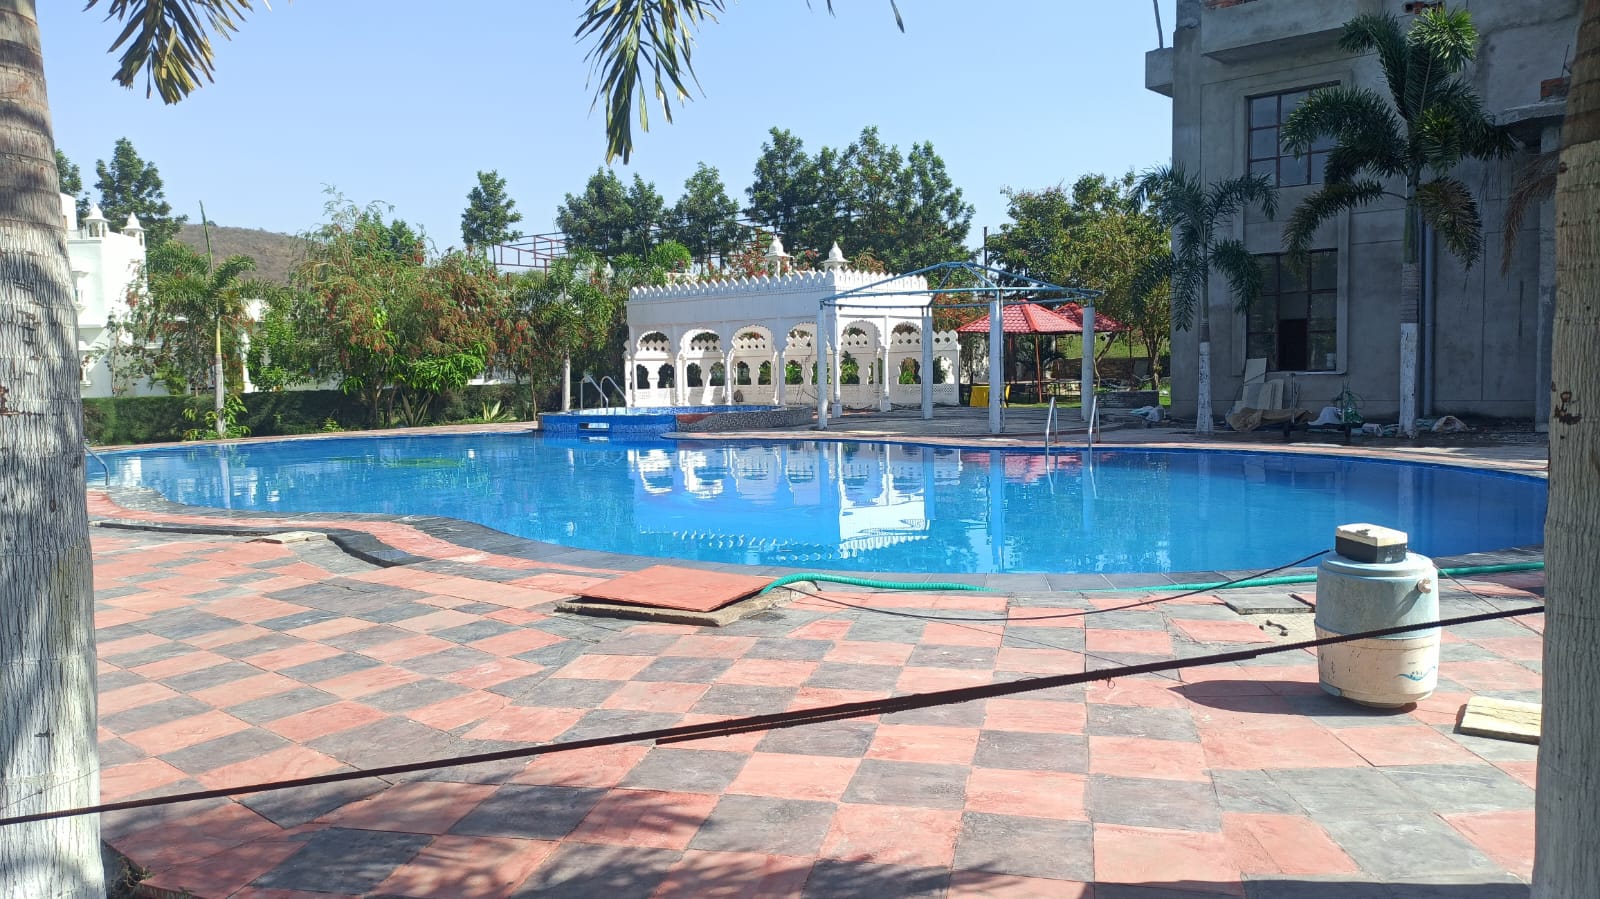 Fenton Water Pool manufacturer ,Jaipur,Hotels & Resorts,Free Classifieds,Post Free Ads,77traders.com